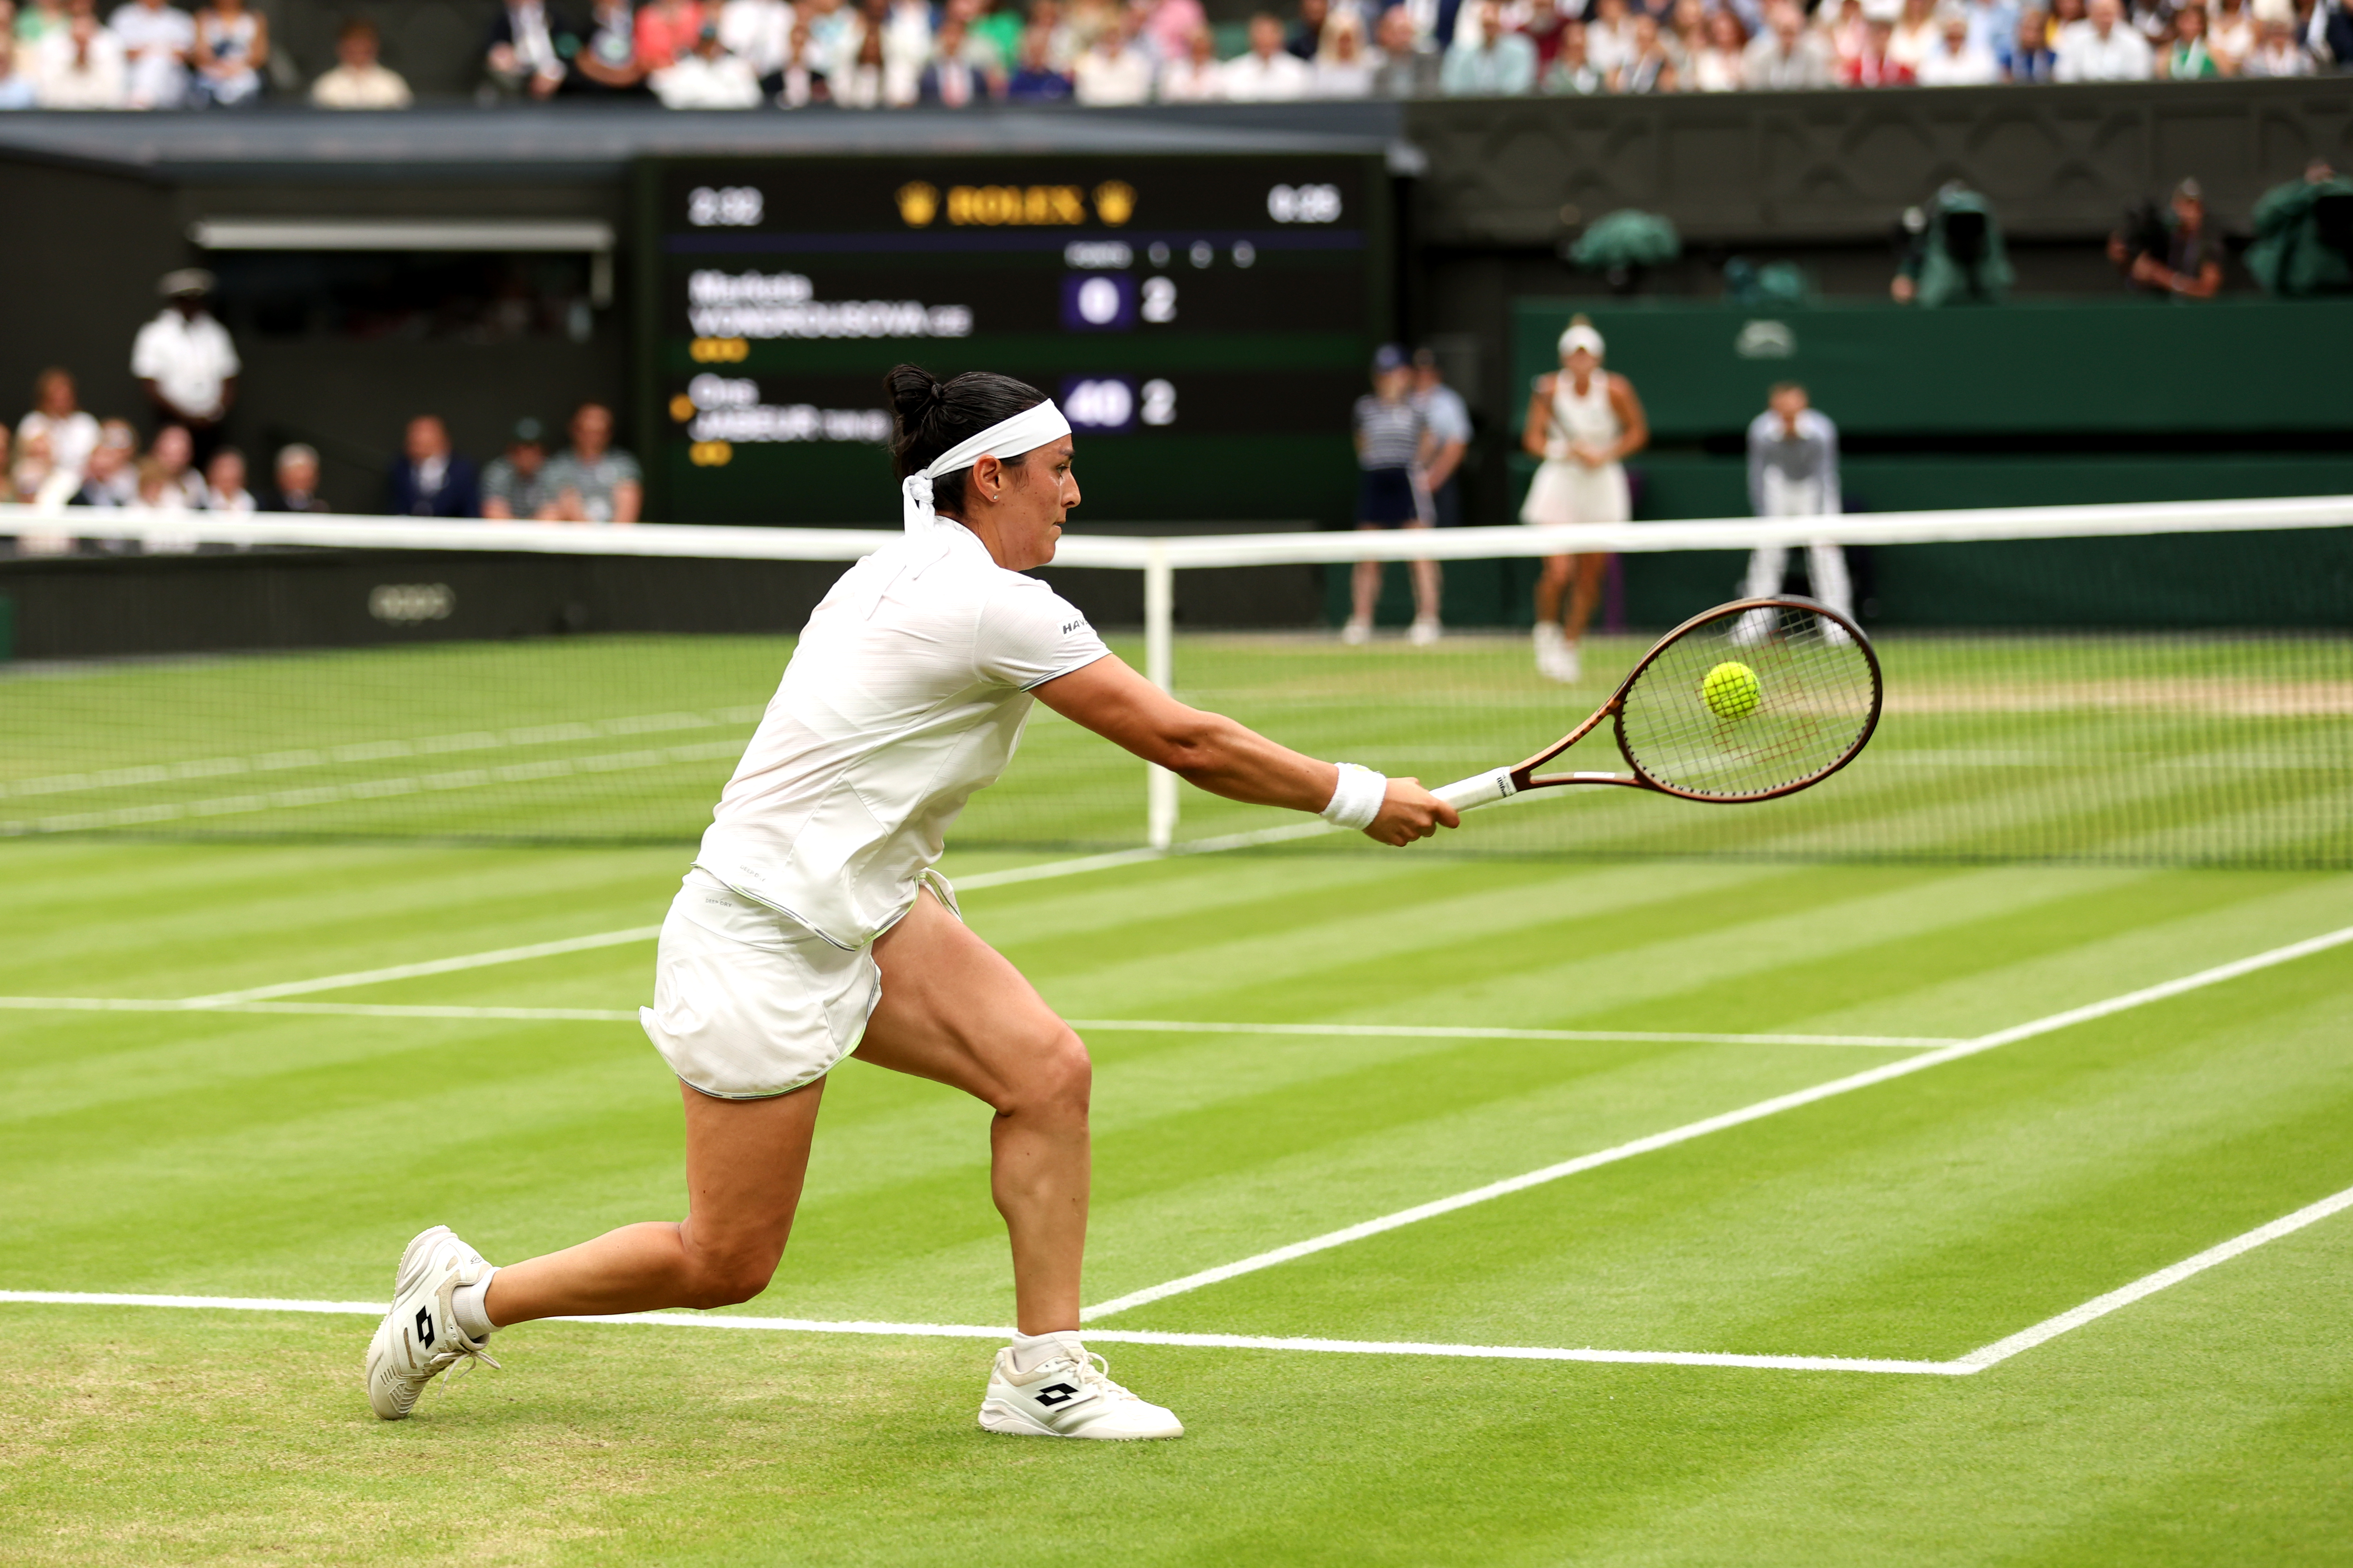 Ons Jabeur of Tunisia plays a forehand during the Women's Singles Final against Marketa Vondrousova of Czech Republic on day thirteen of The Championships Wimbledon 2023 at All England Lawn Tennis and Croquet Club on July 15, 2023 in London, England. (Photo by Julian Finney/Getty Images)